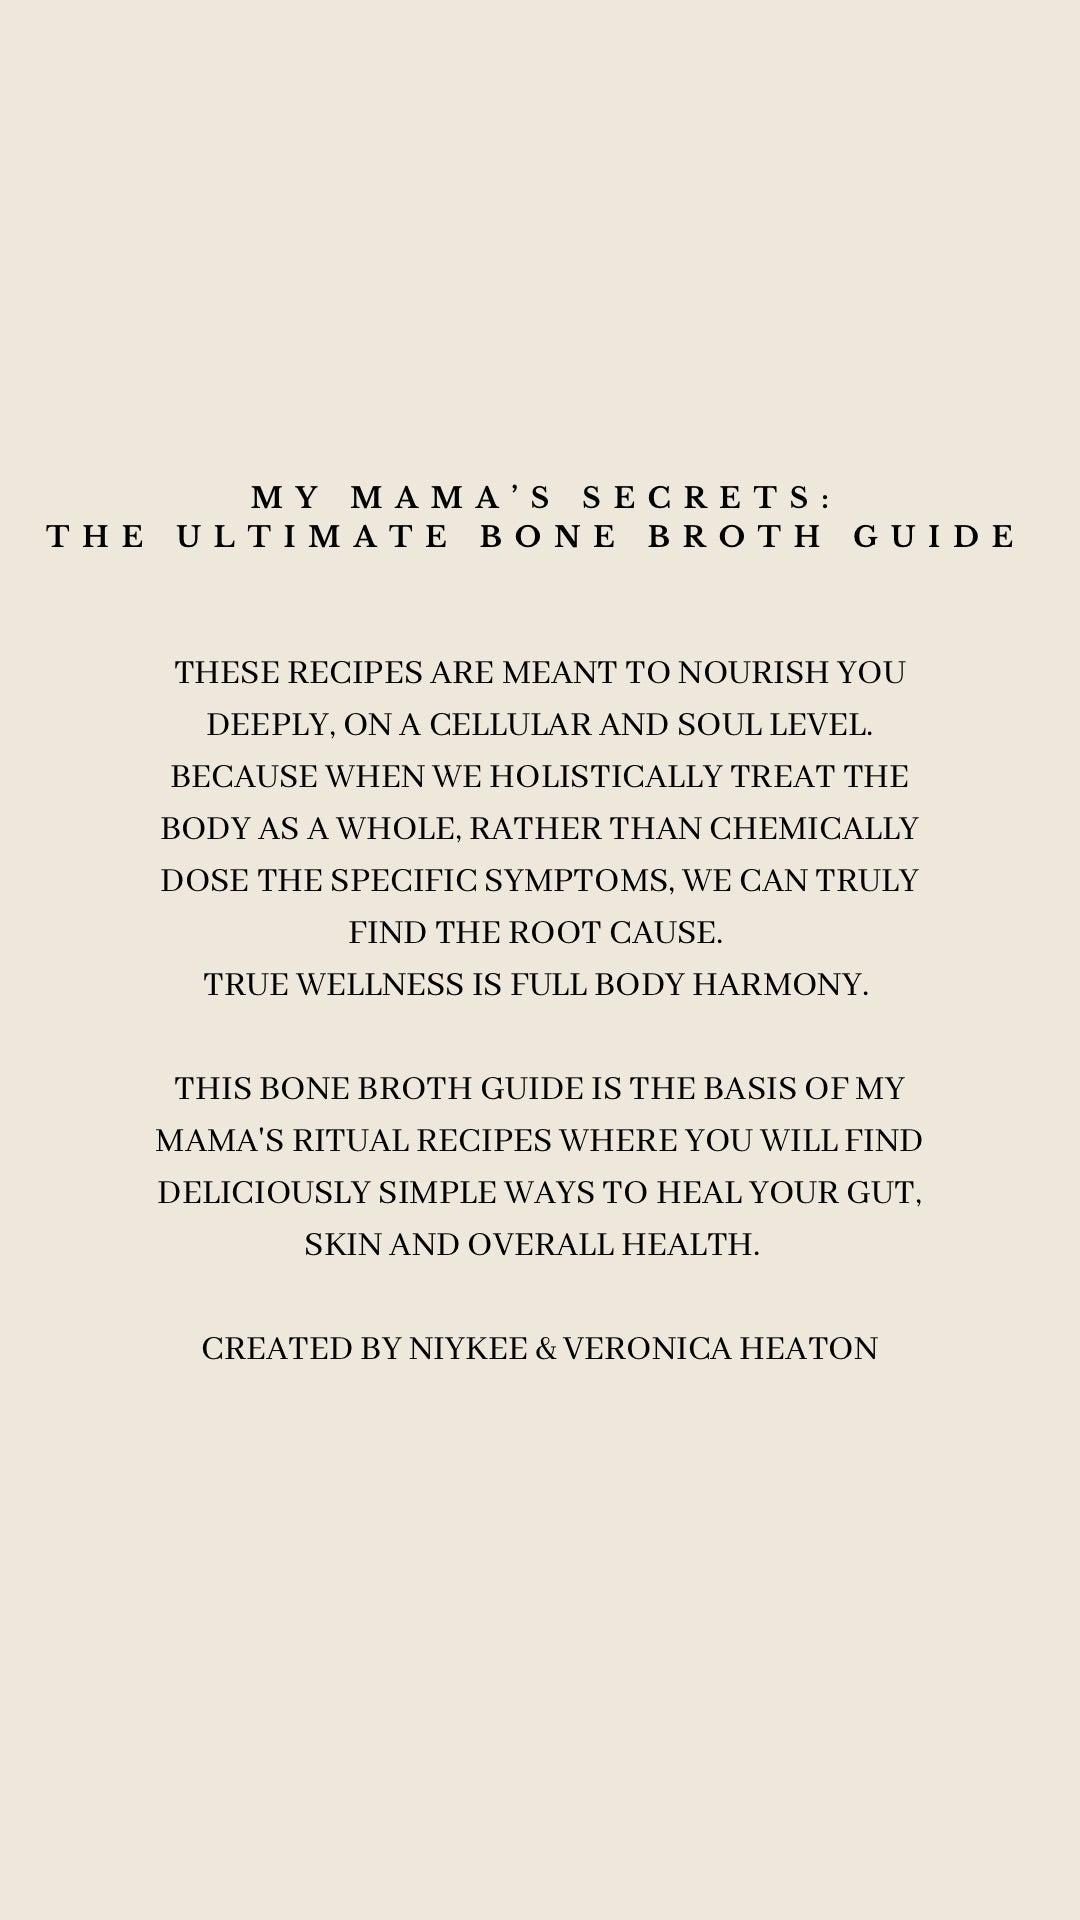 INTUITIVE HEALING: THE ULTIMATE BONE BROTH GUIDE